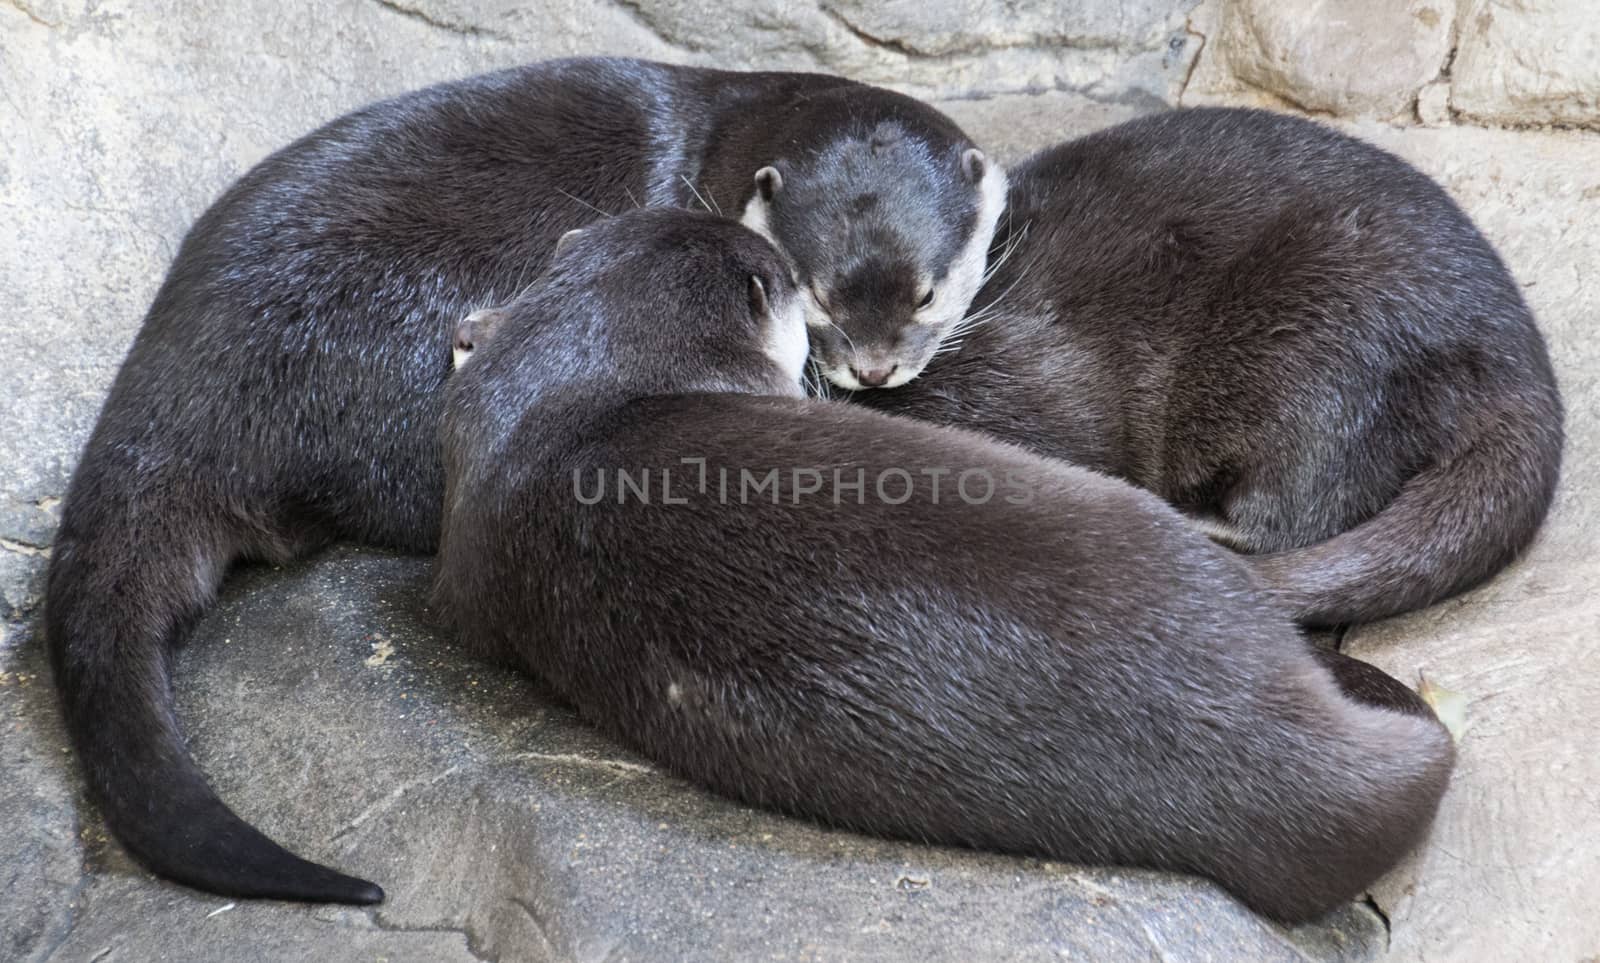 Three otters napping peacefully on a large rock.